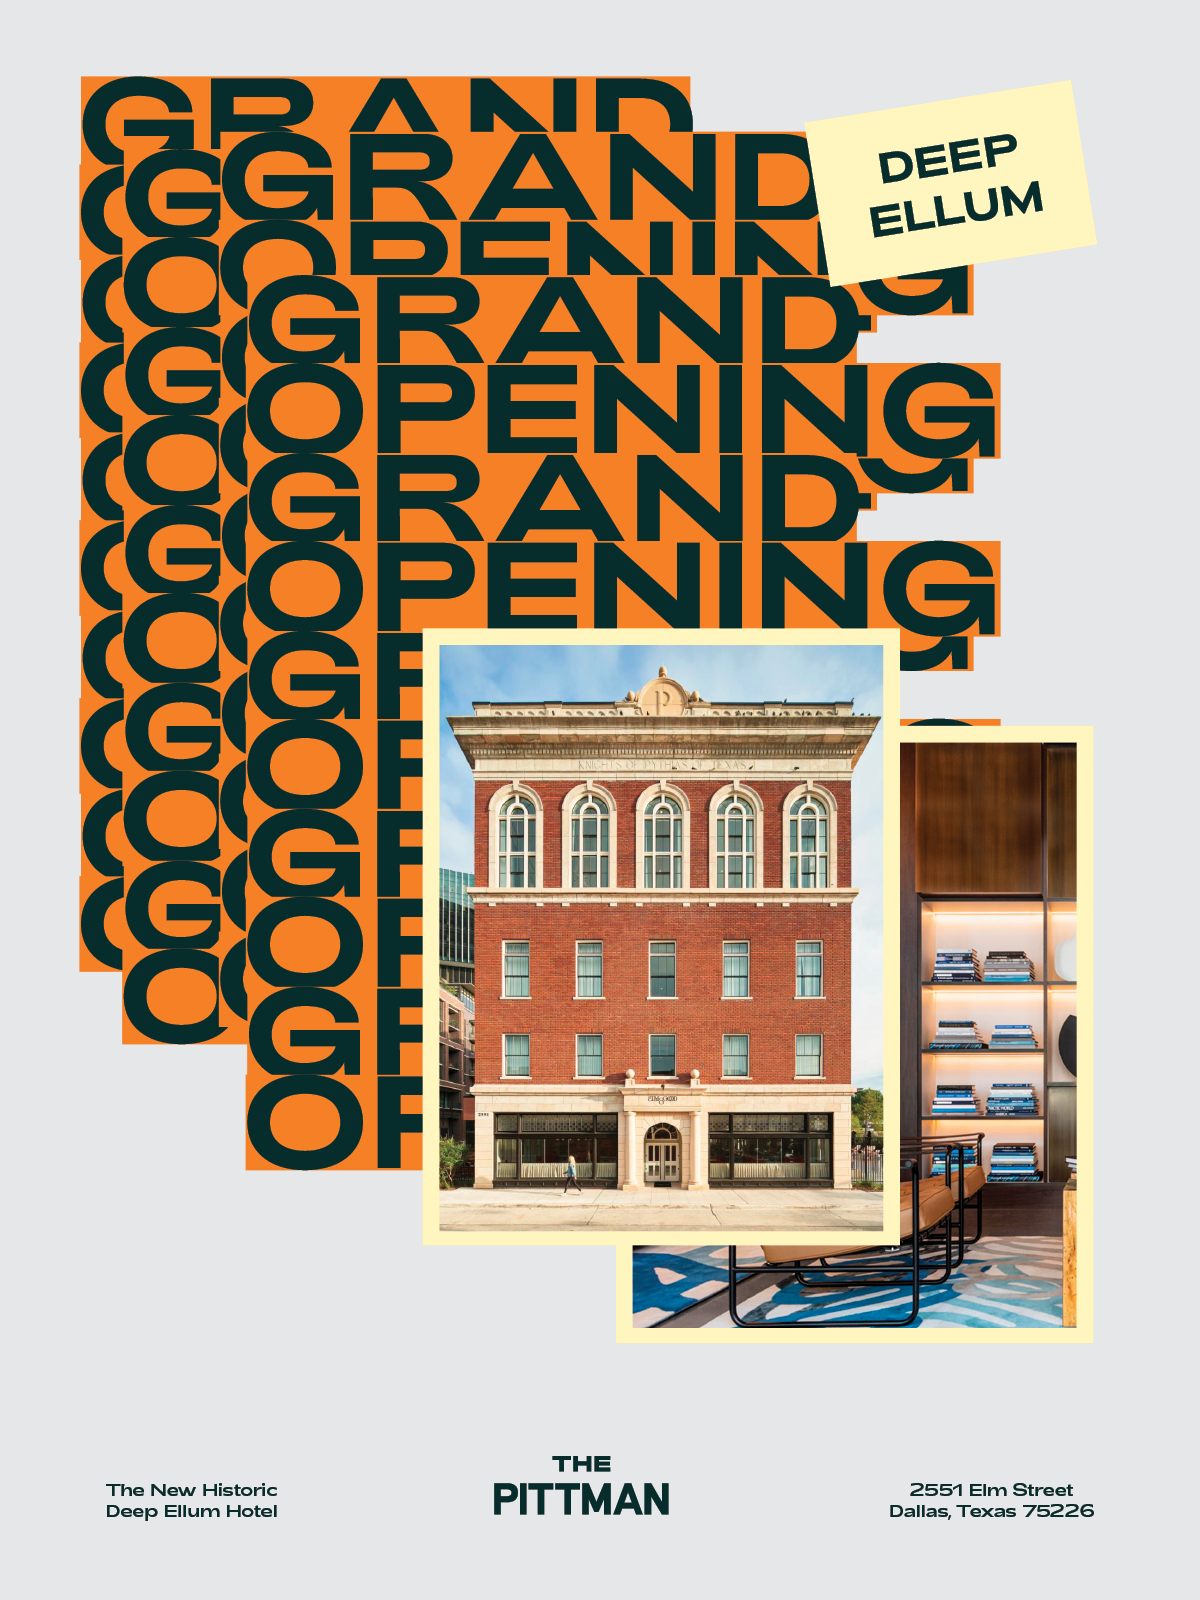 The Pittman Hotel grand opening poster designed by Tractorbeam